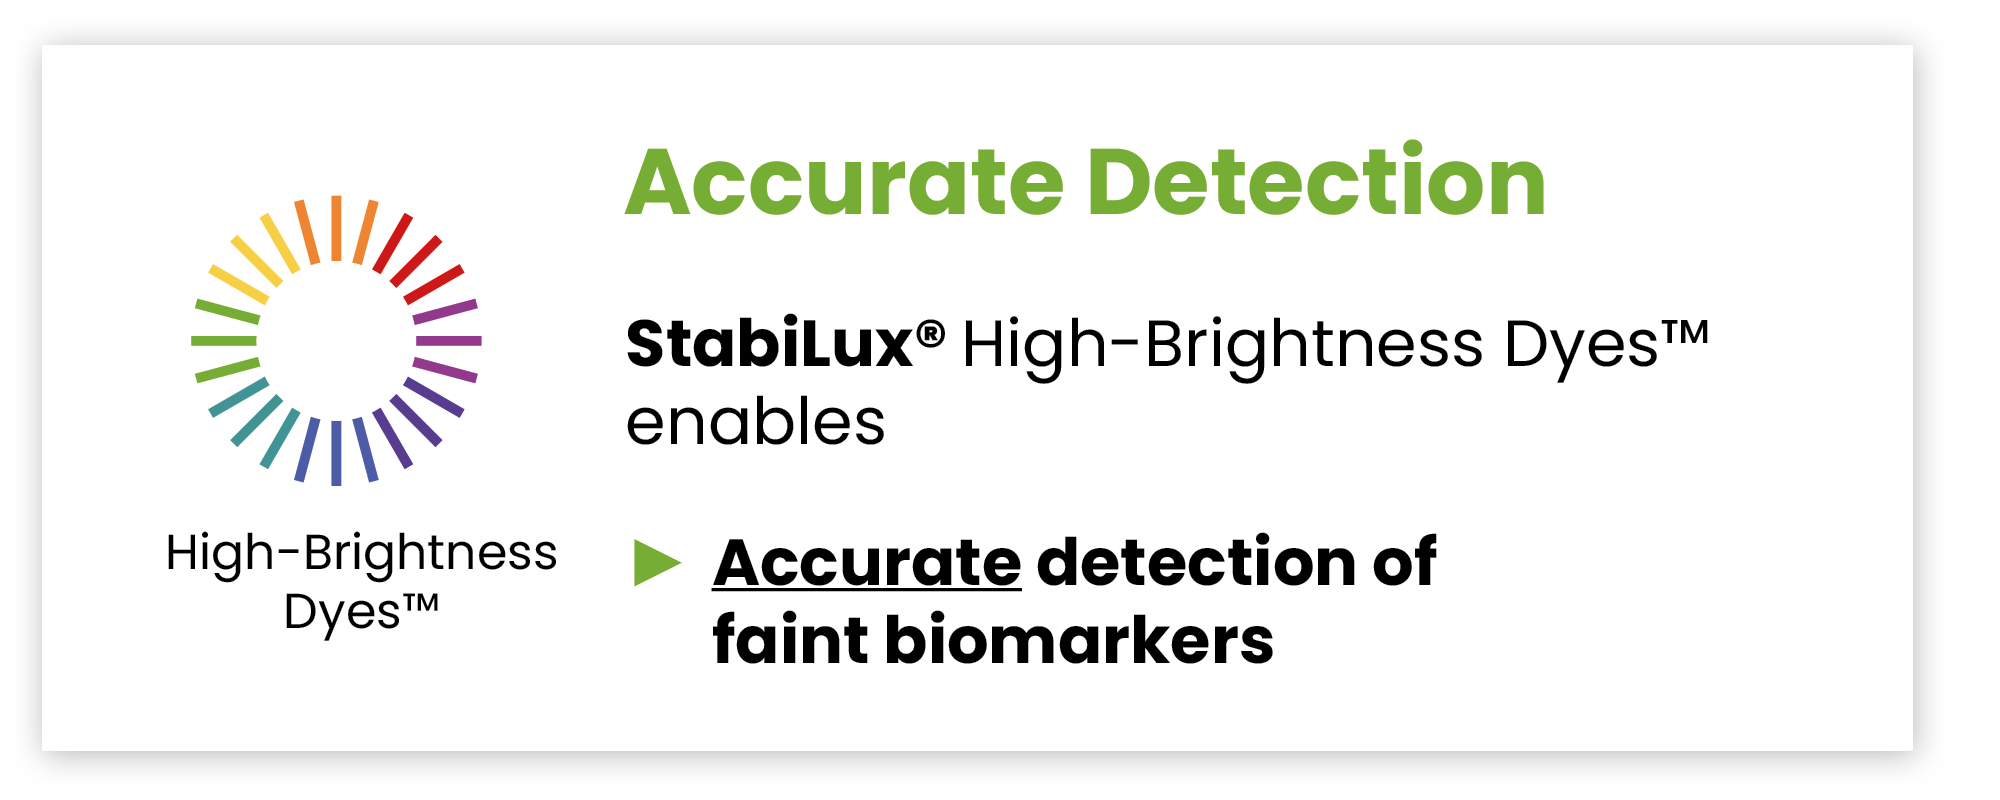 StabiLux Accurate Detection